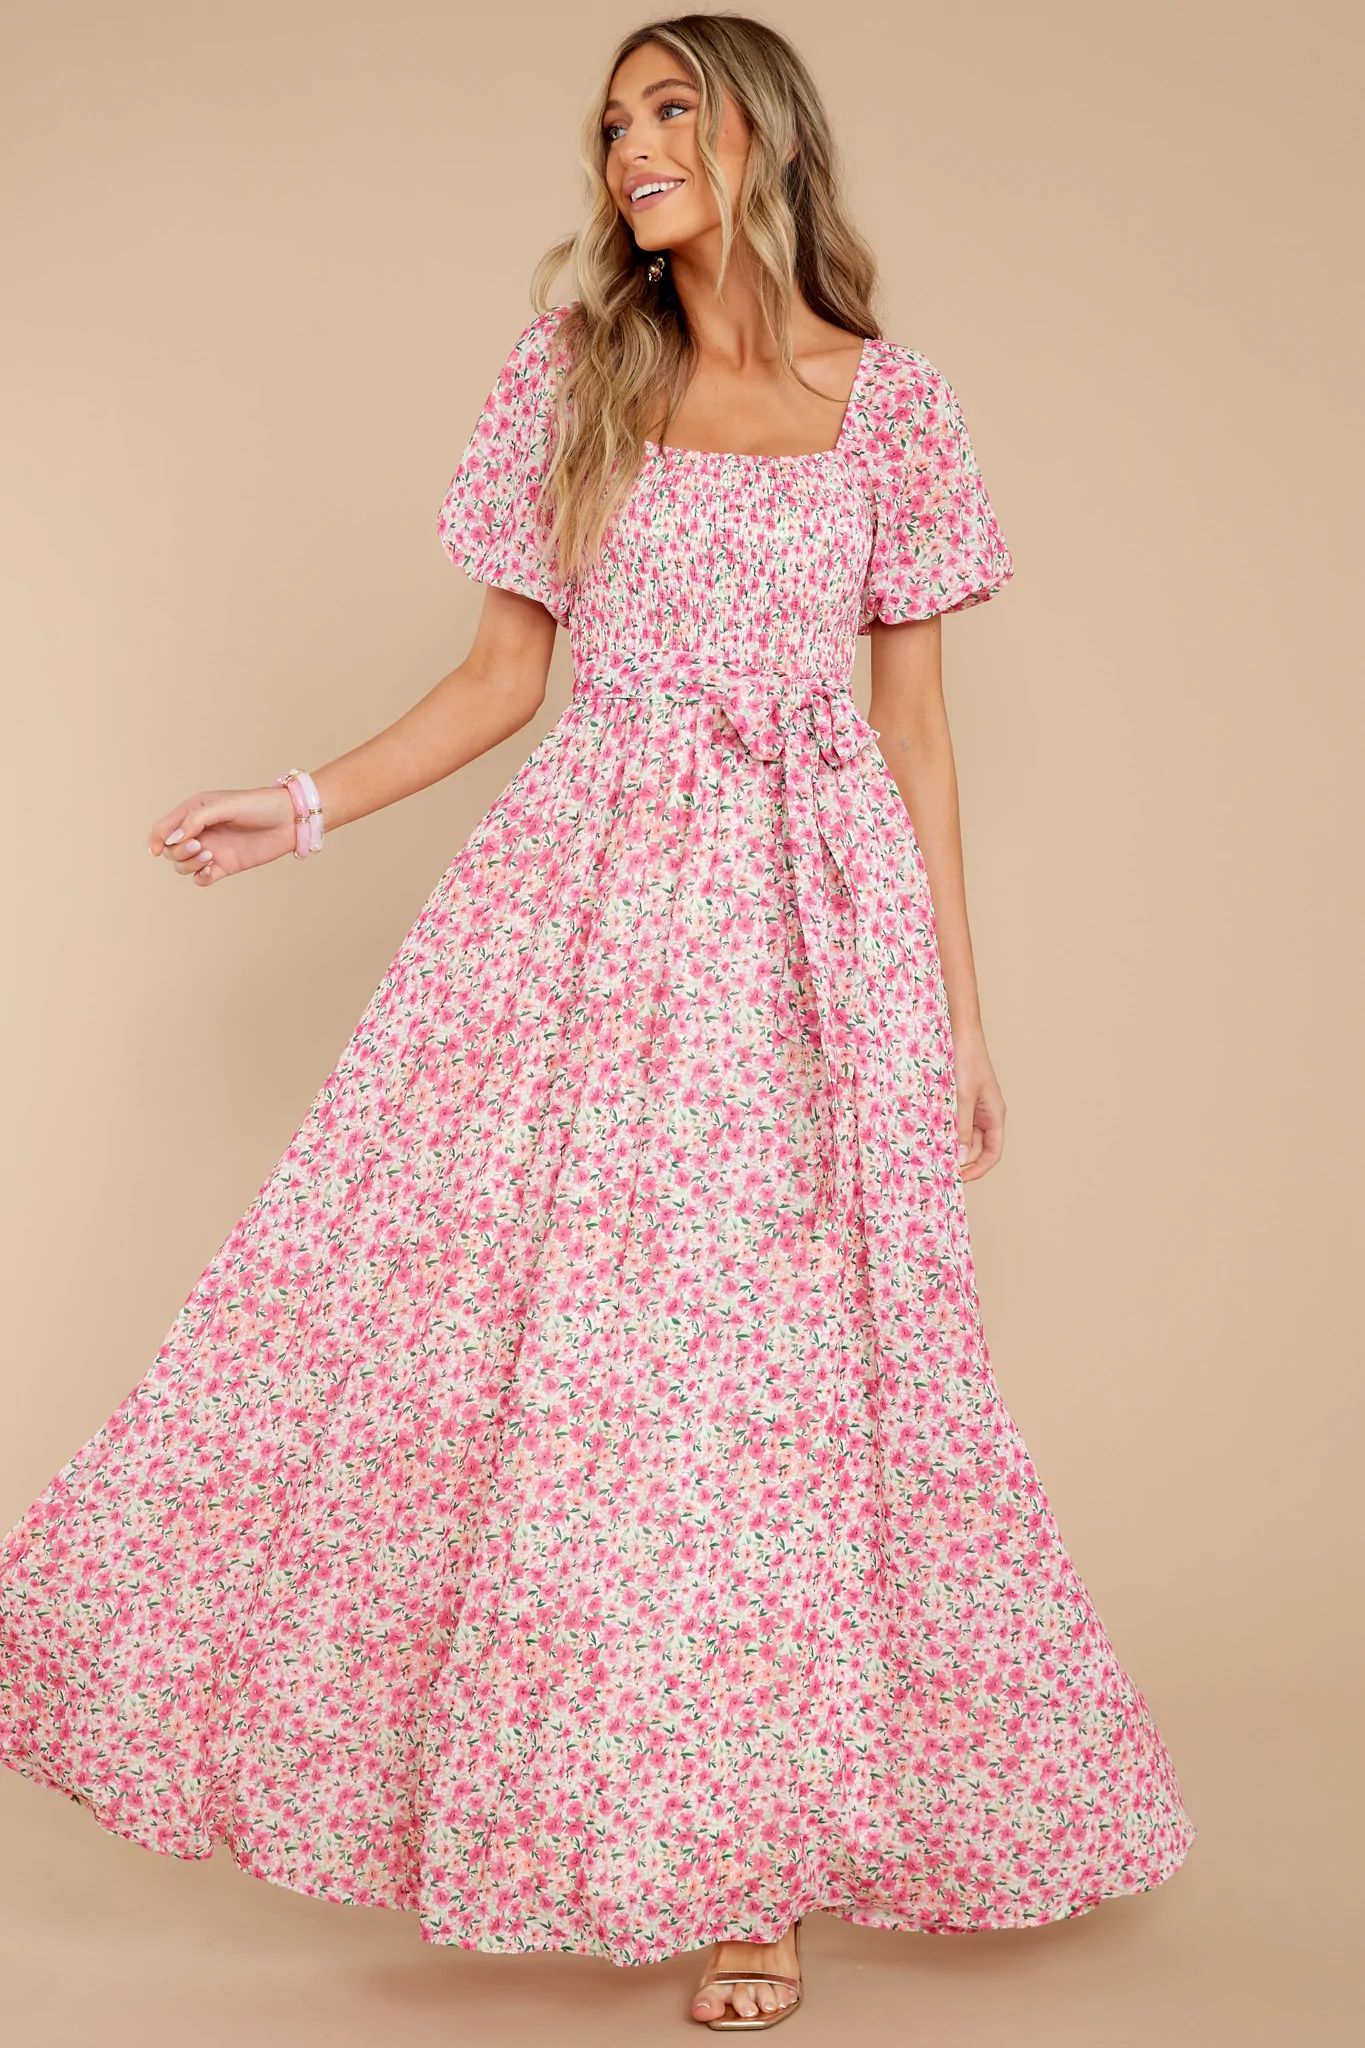 Showers Of Roses Pink Floral Print Maxi Dress | Red Dress 